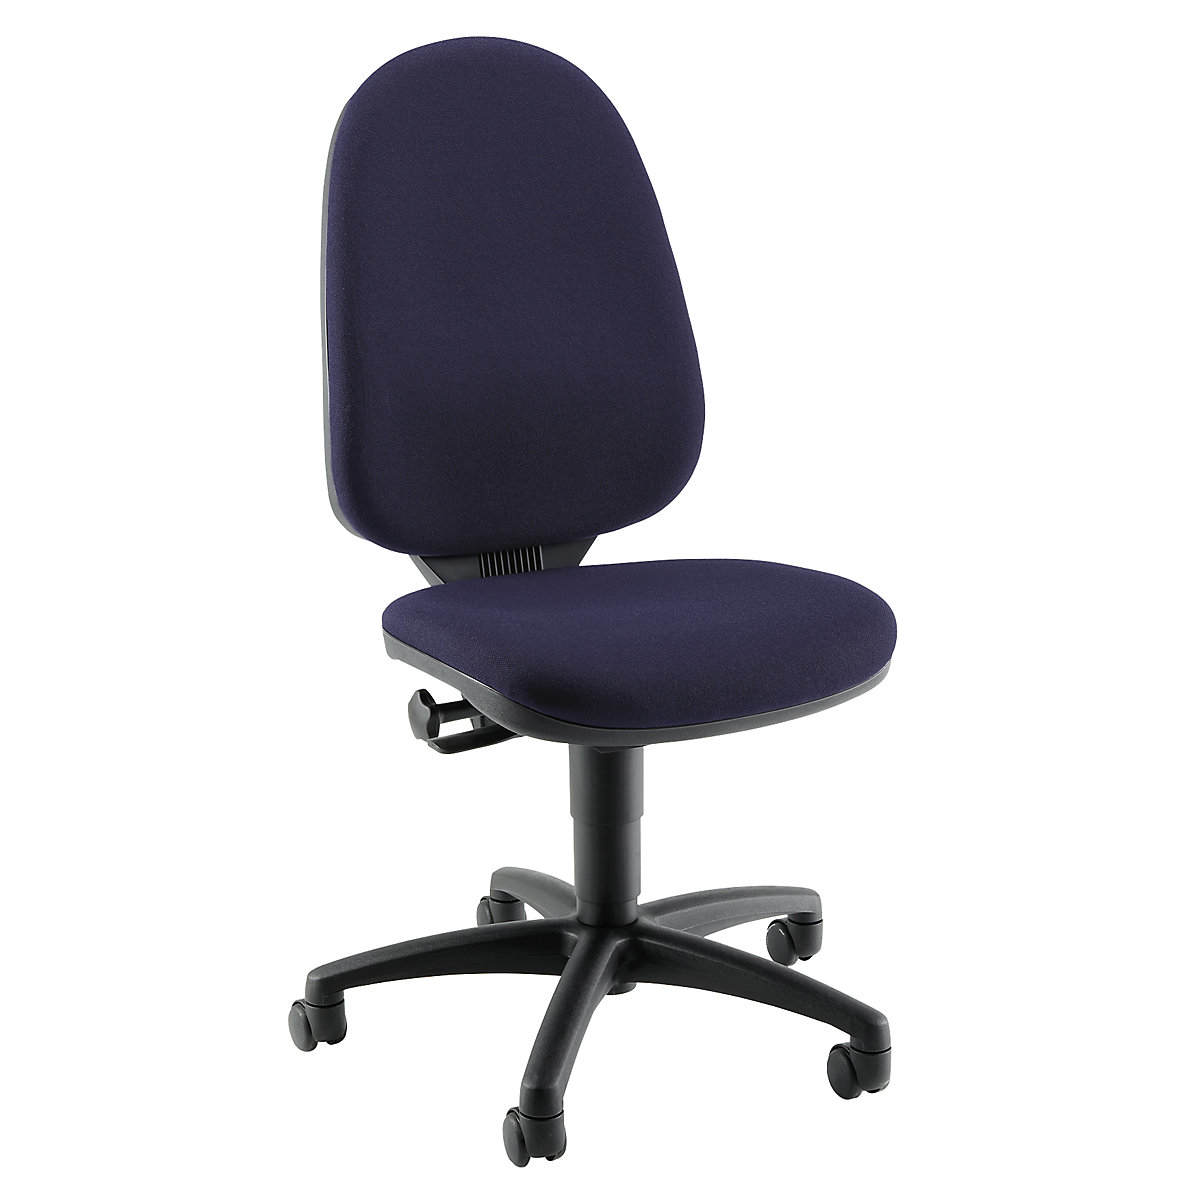 Standard swivel chair – Topstar, without arm rests, back rest 550 mm, frame black, fabric blue-5